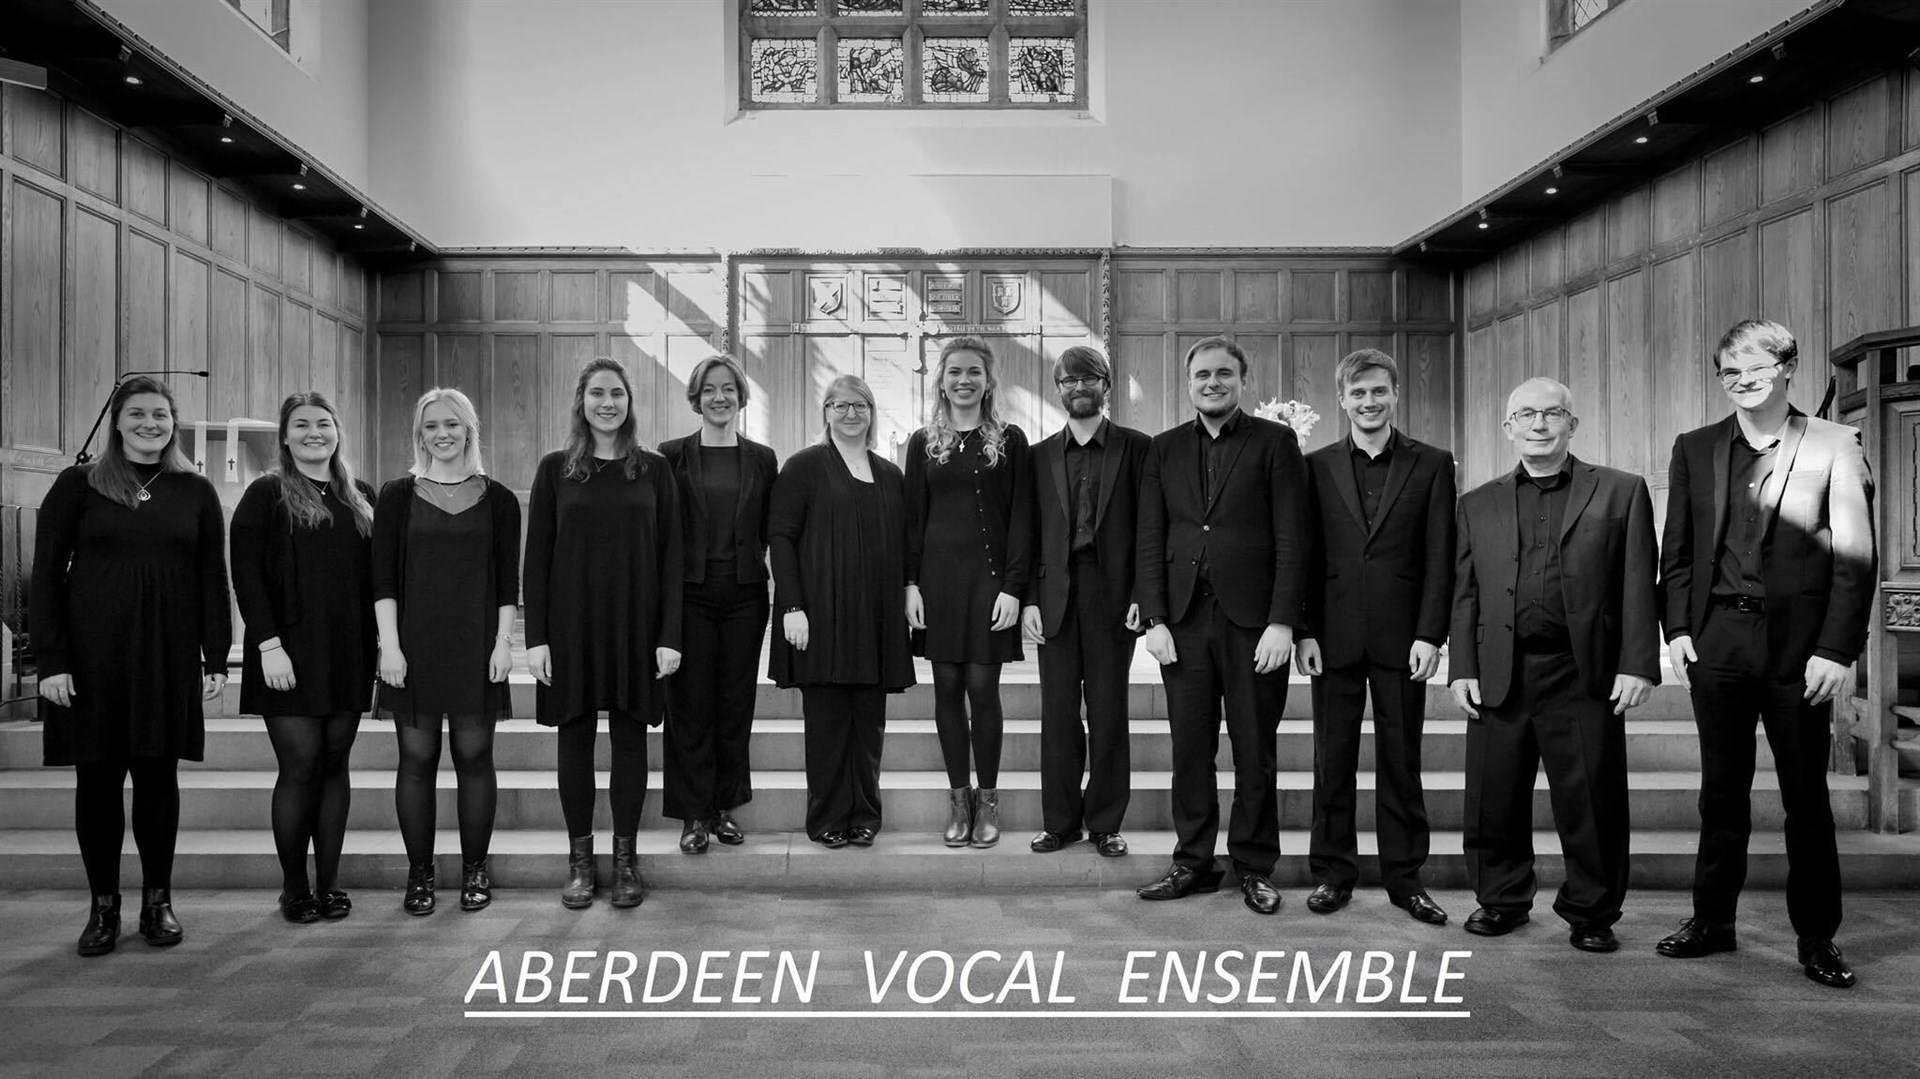 Aberdeen Vocal Ensemble is preparing to perform in Moray. Lossiemouth's Erin Ralph (sixth right) and Elgin's Ross Cumming (fourth right) form part of the group.